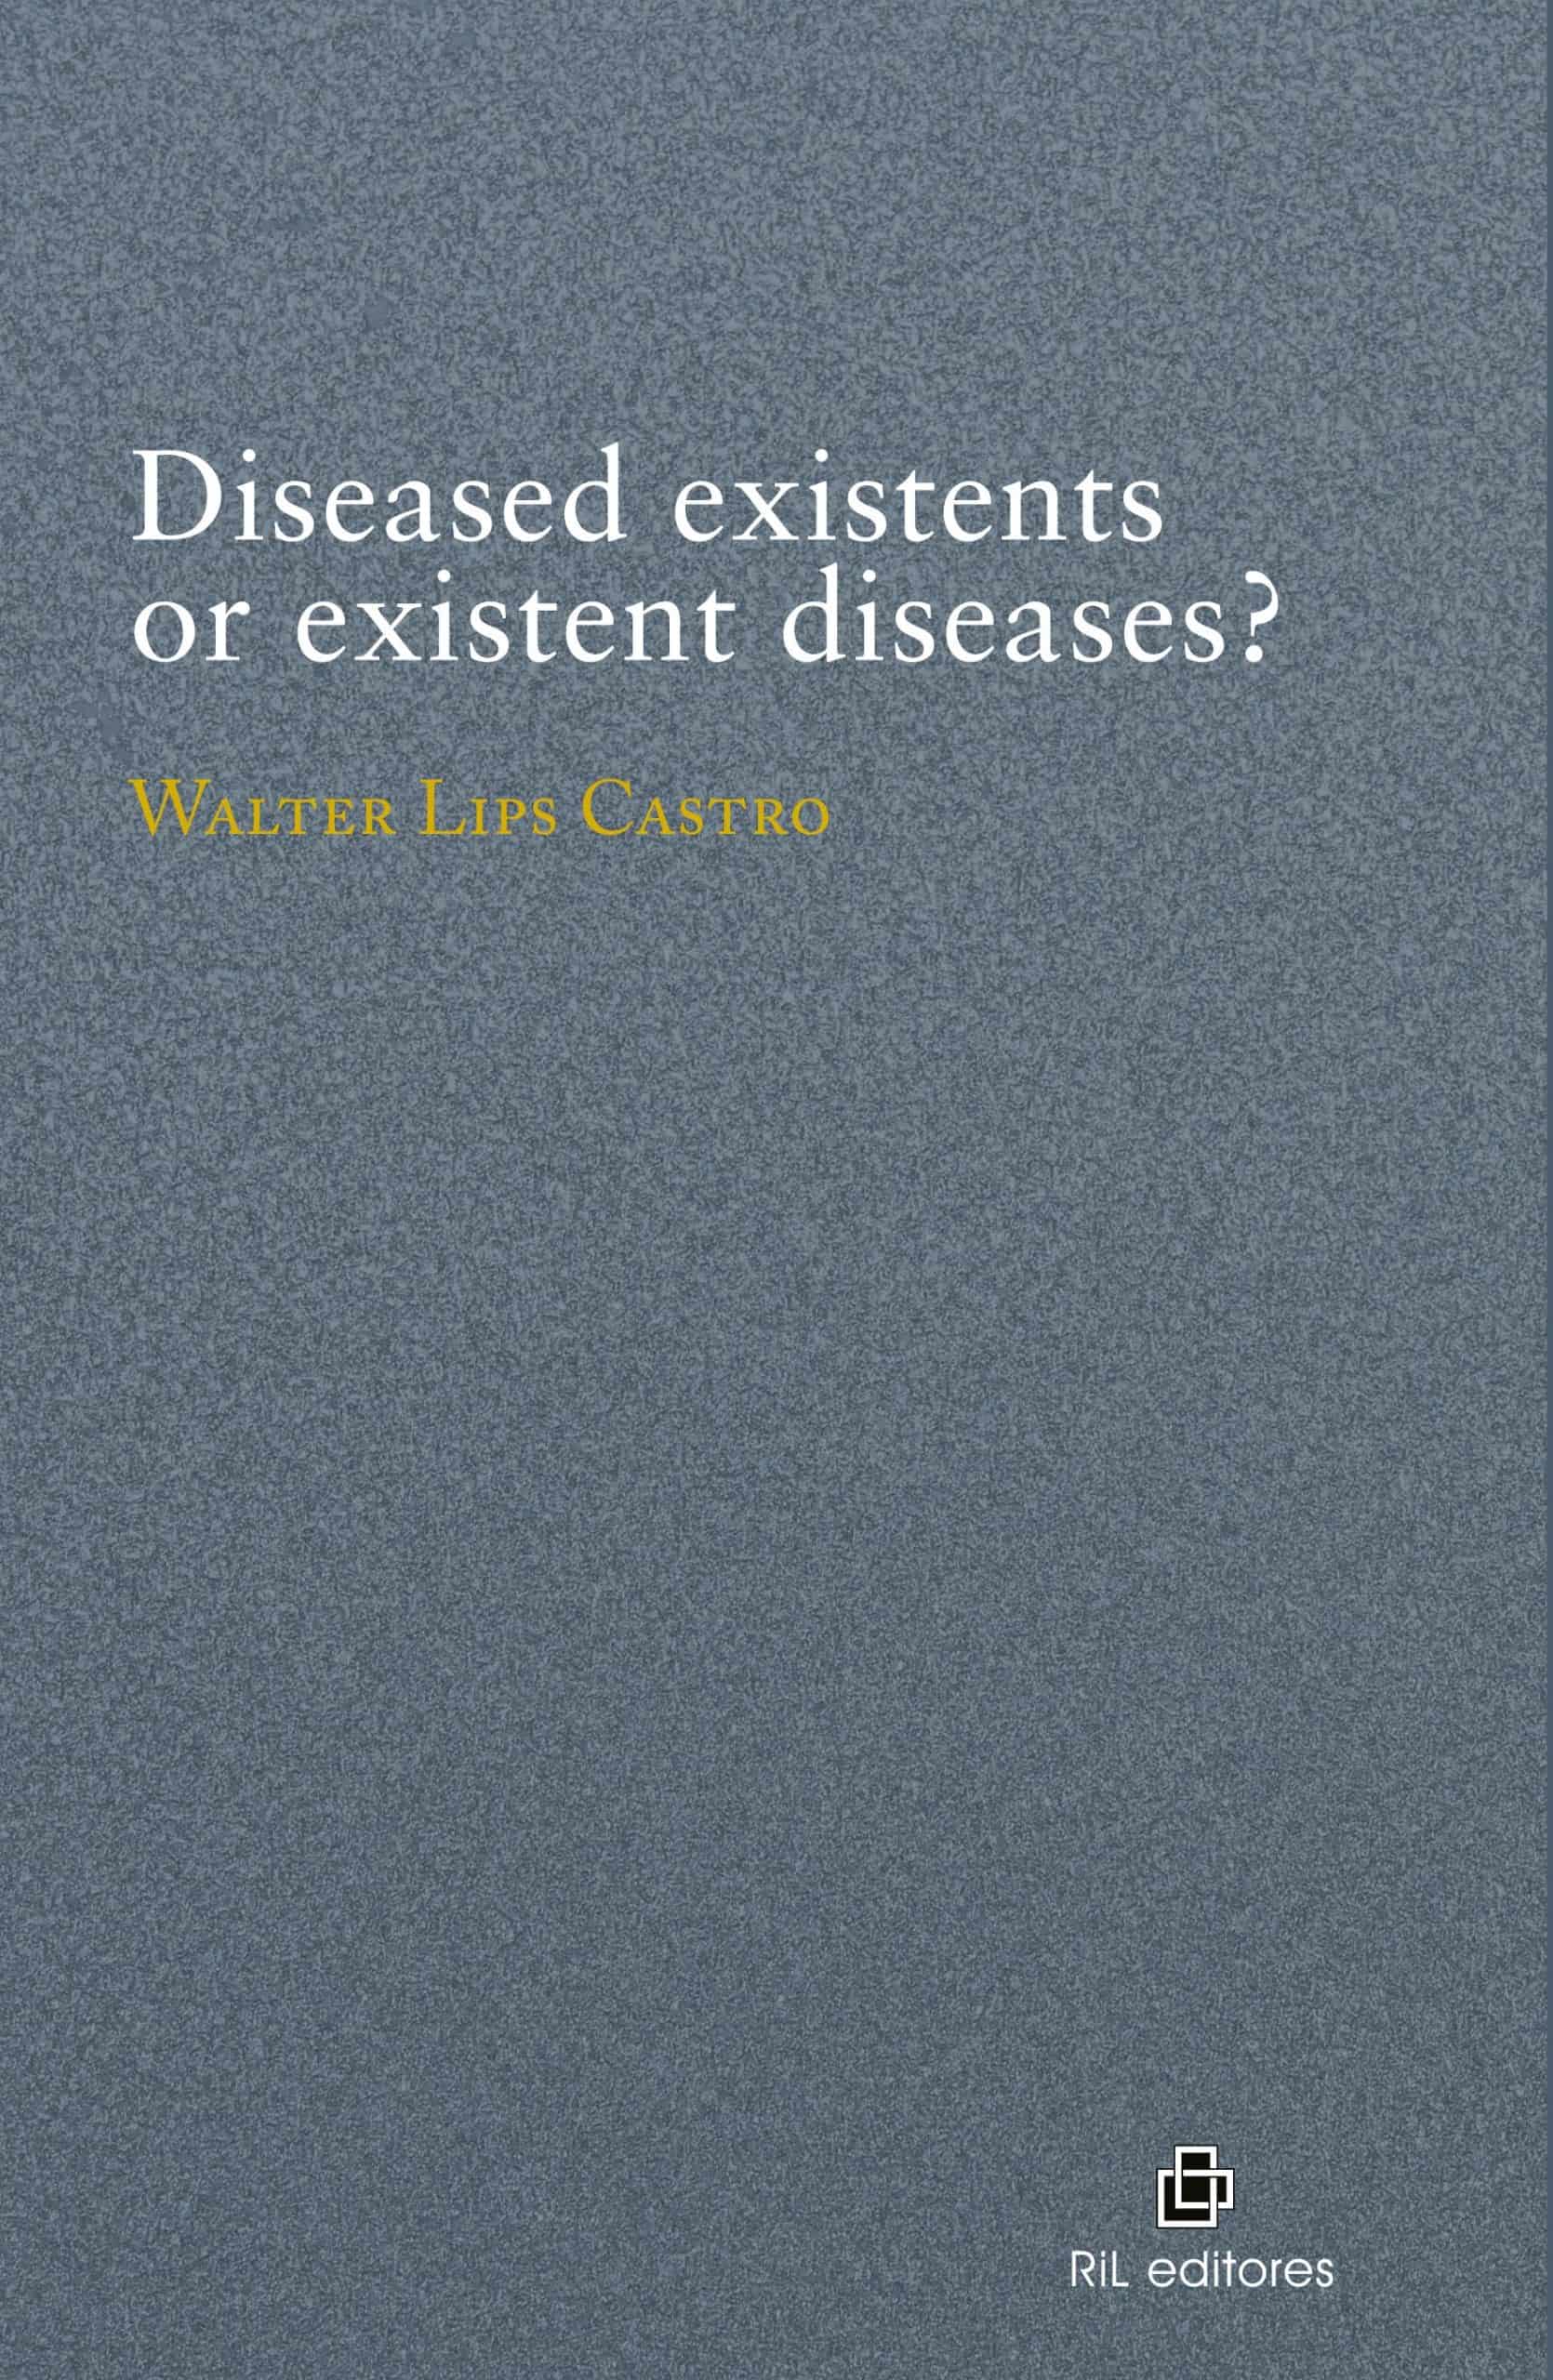 Diseased existents or existent diseases? 1